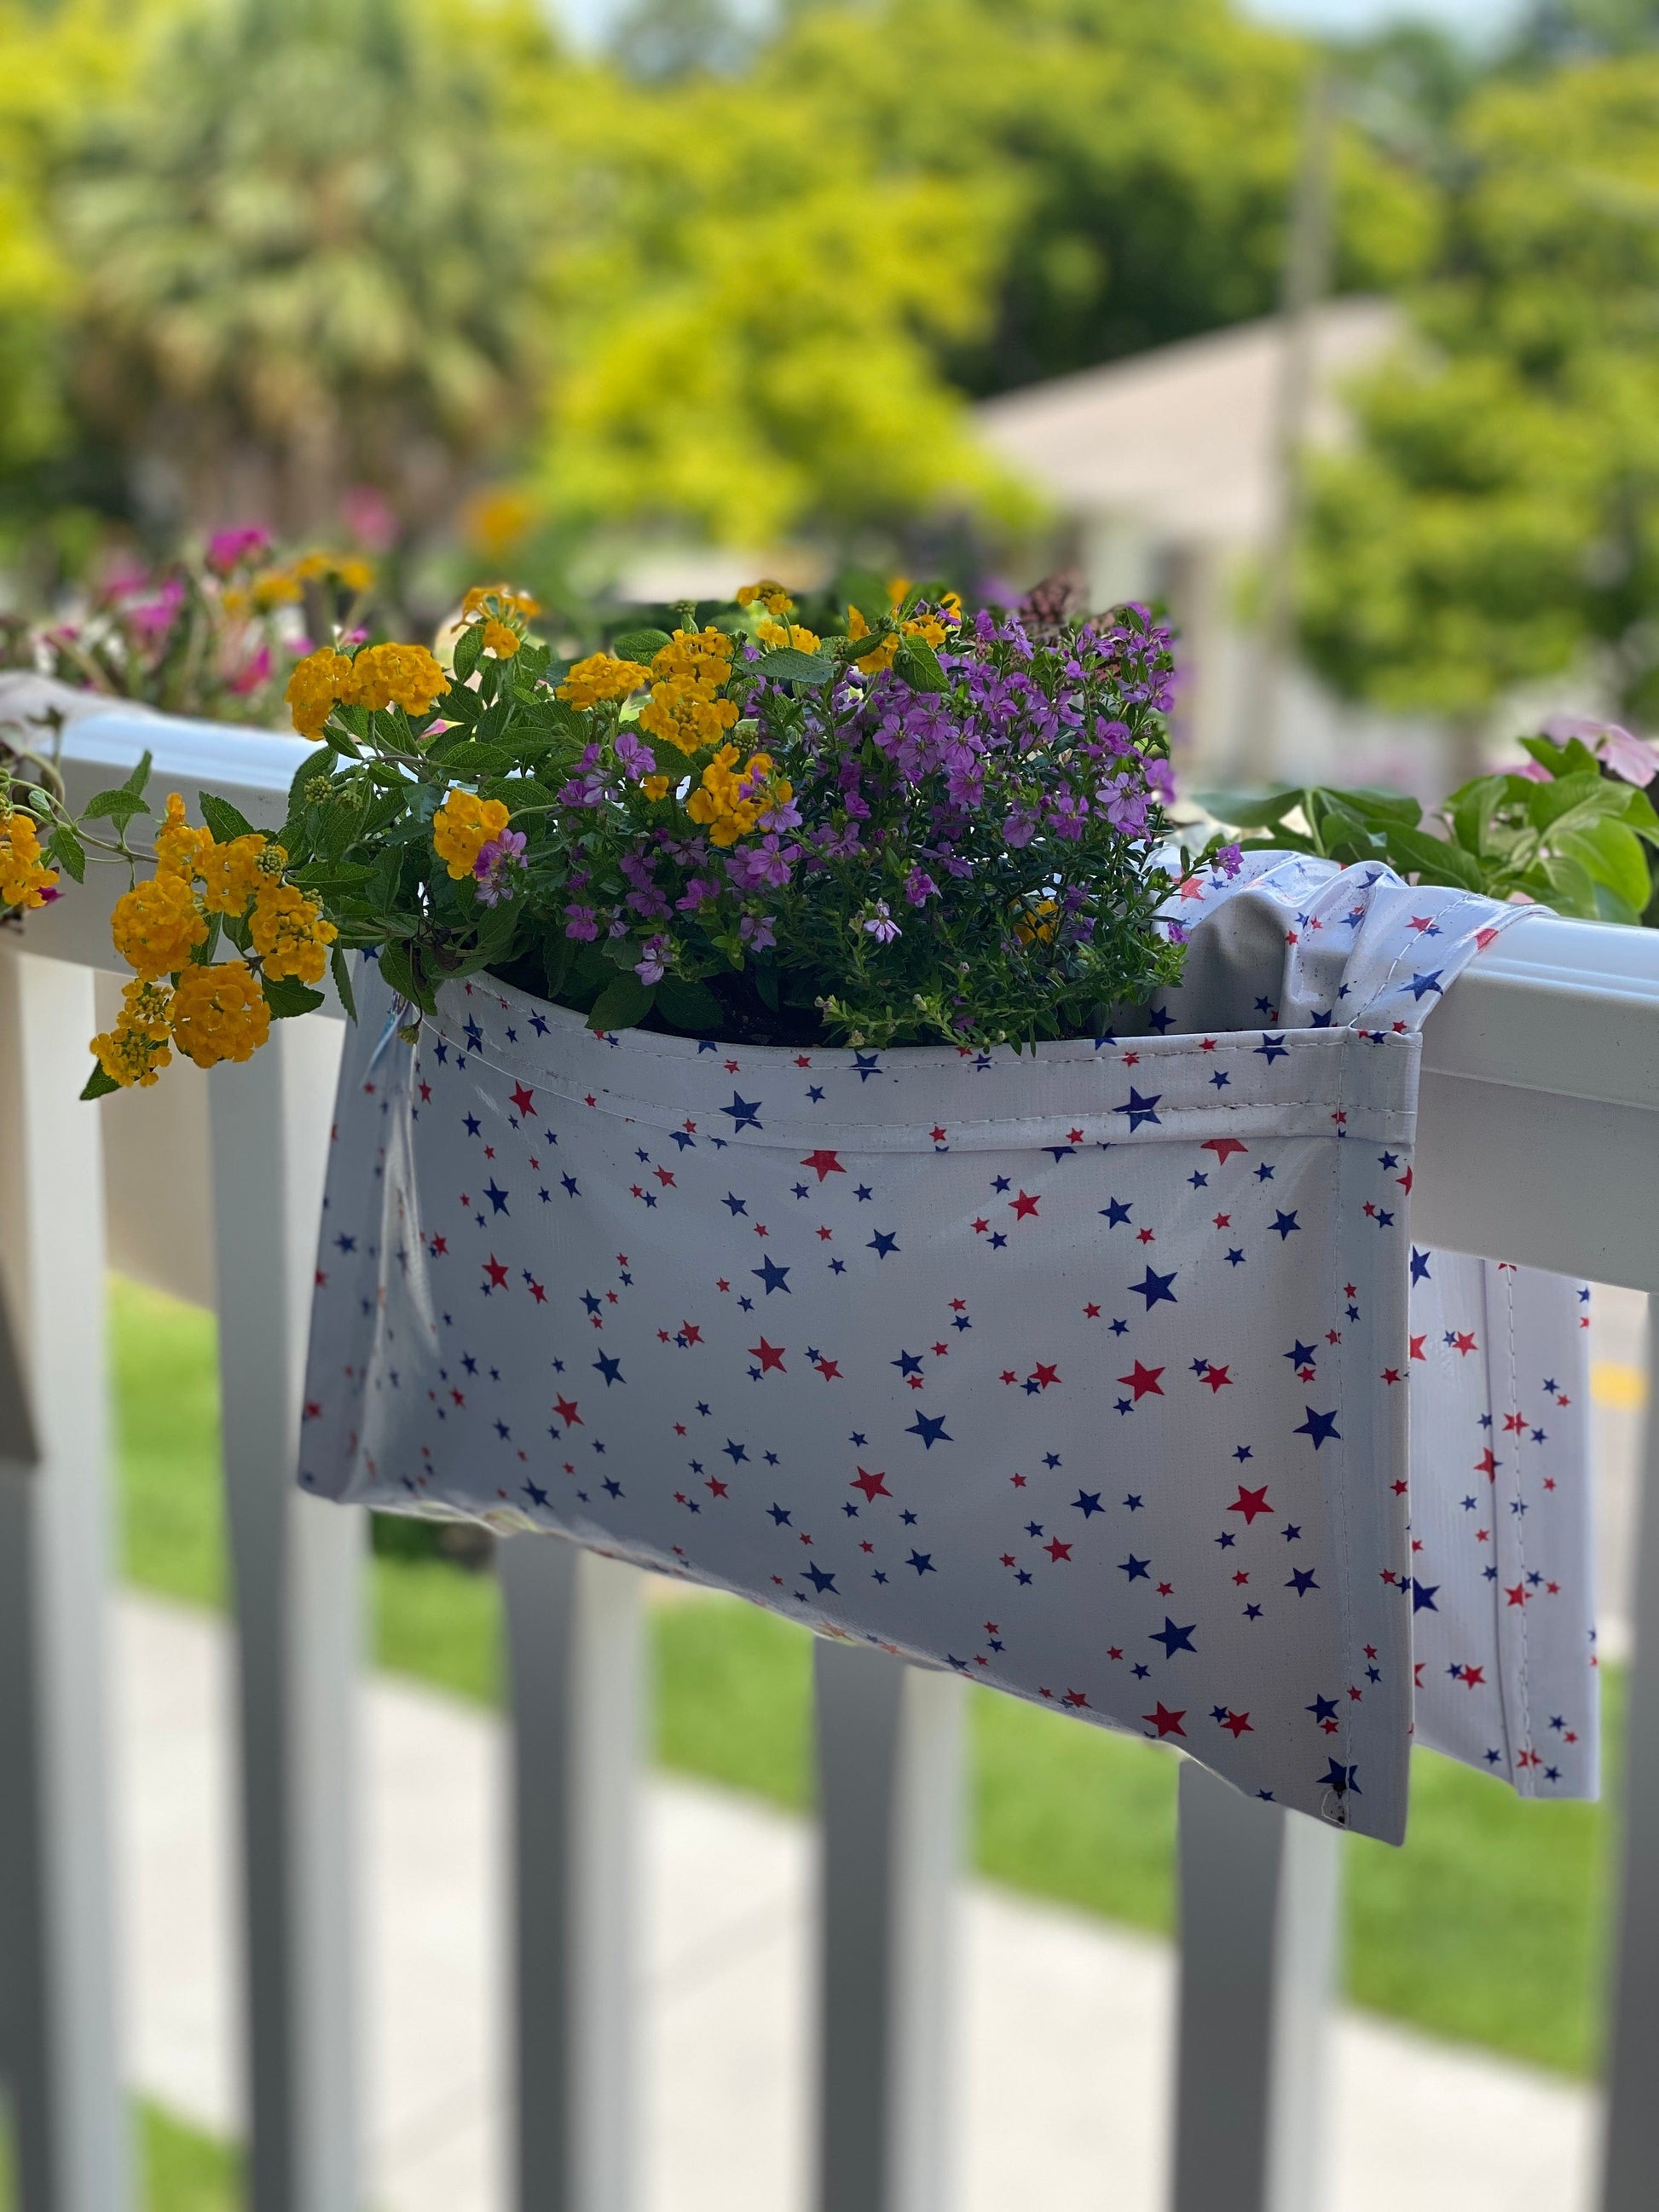 White with small blue and red stars railing planter for flowers, plants and herbs like a saddle bag and hangs from the railing of a patio, balcony, deck or terrance.